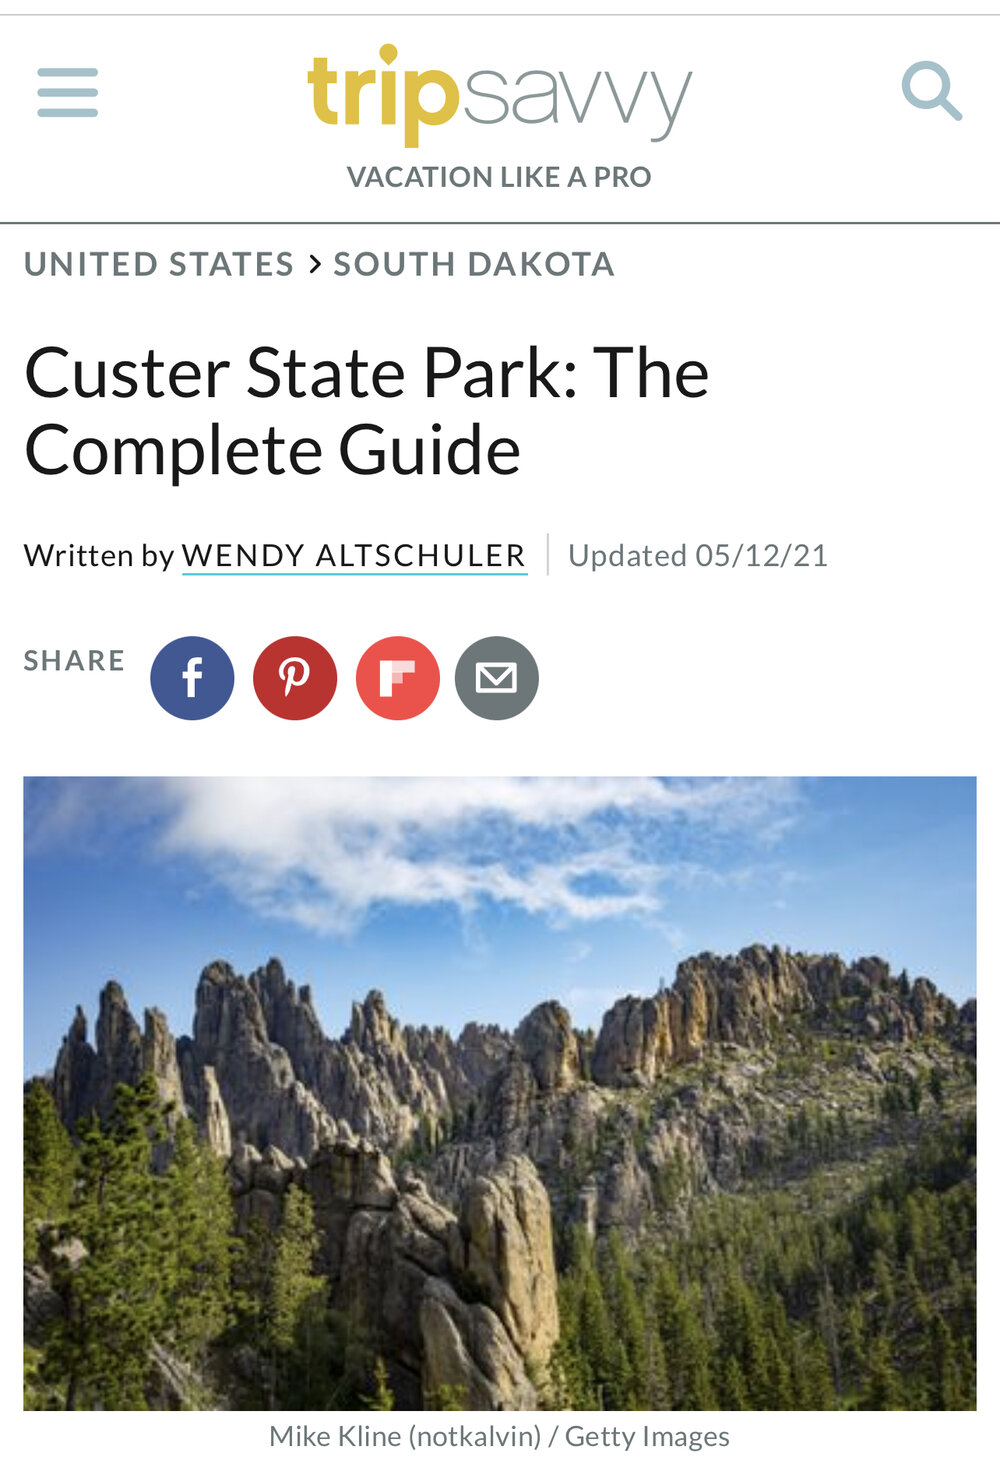 Custer State Park: The Complete Guide